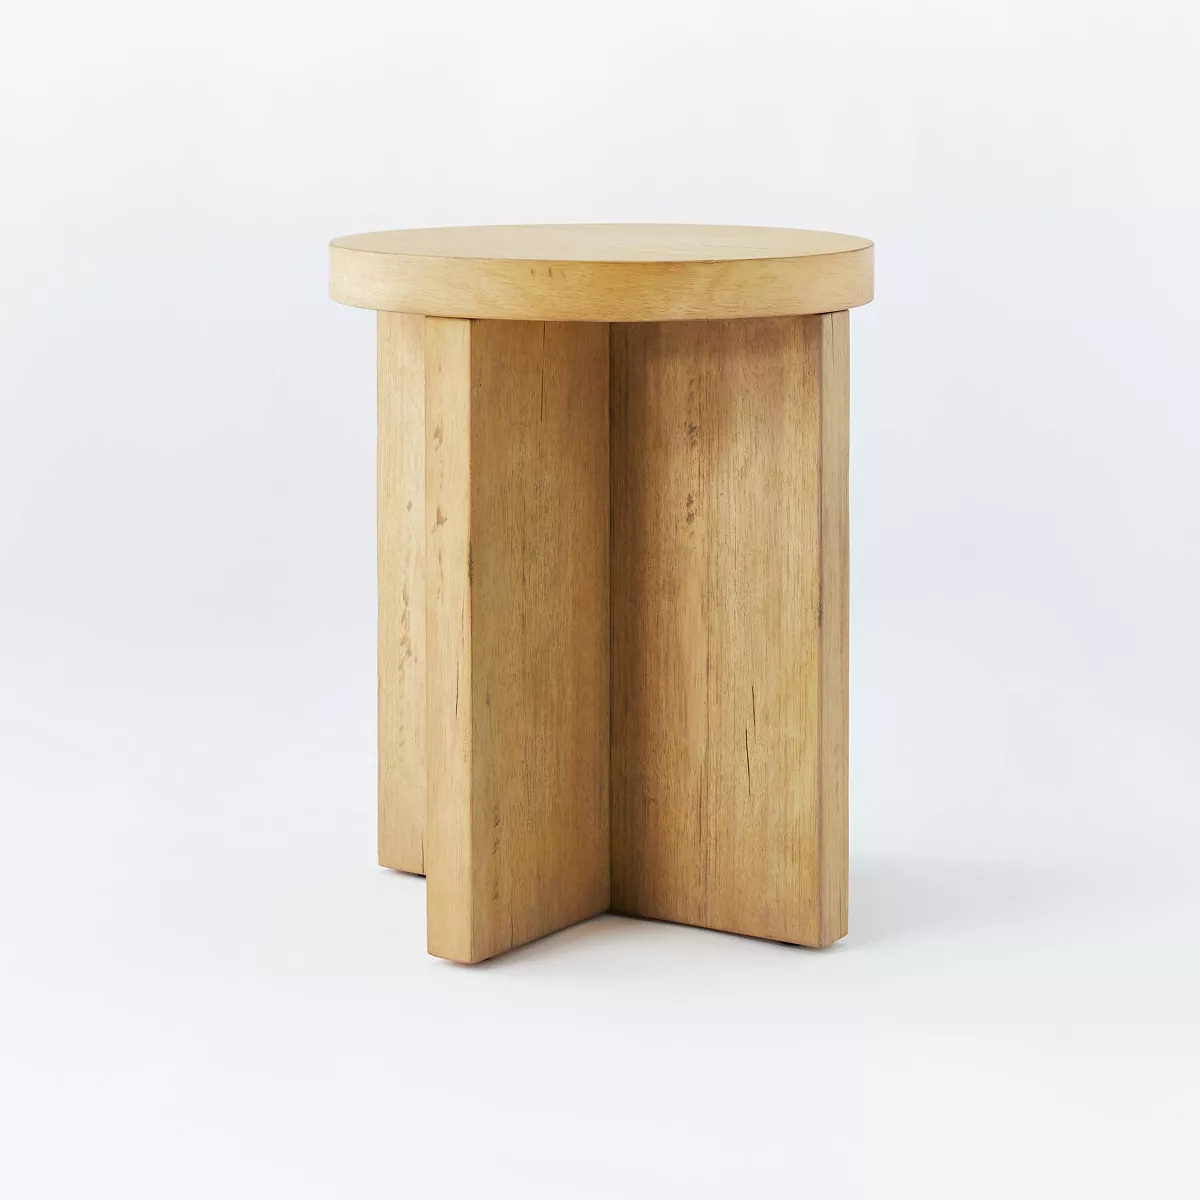 Wood accent table